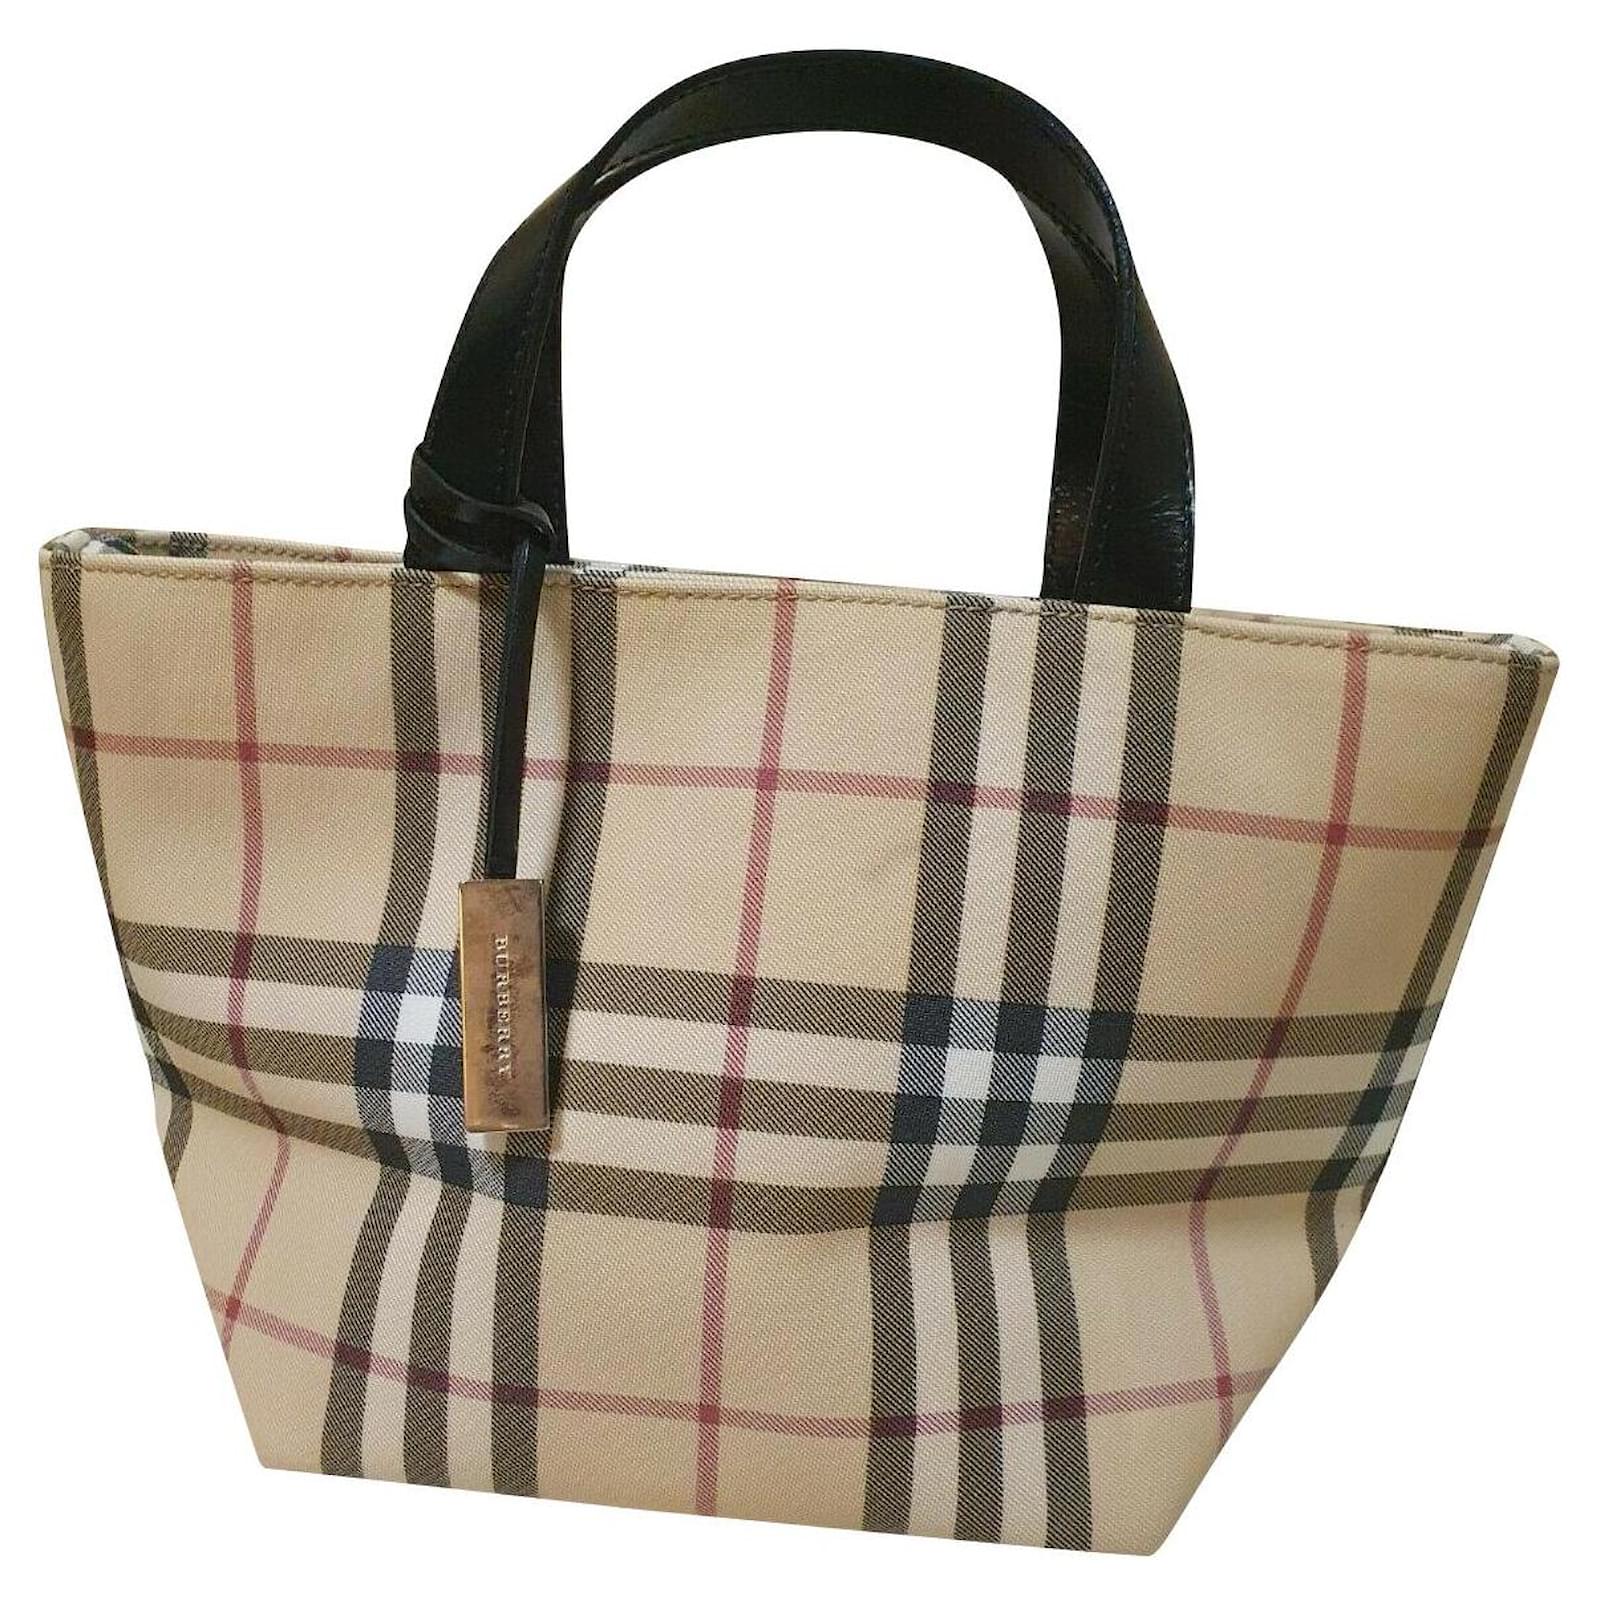 Vintage Burberry Tote Bag With Tan Leather Trim